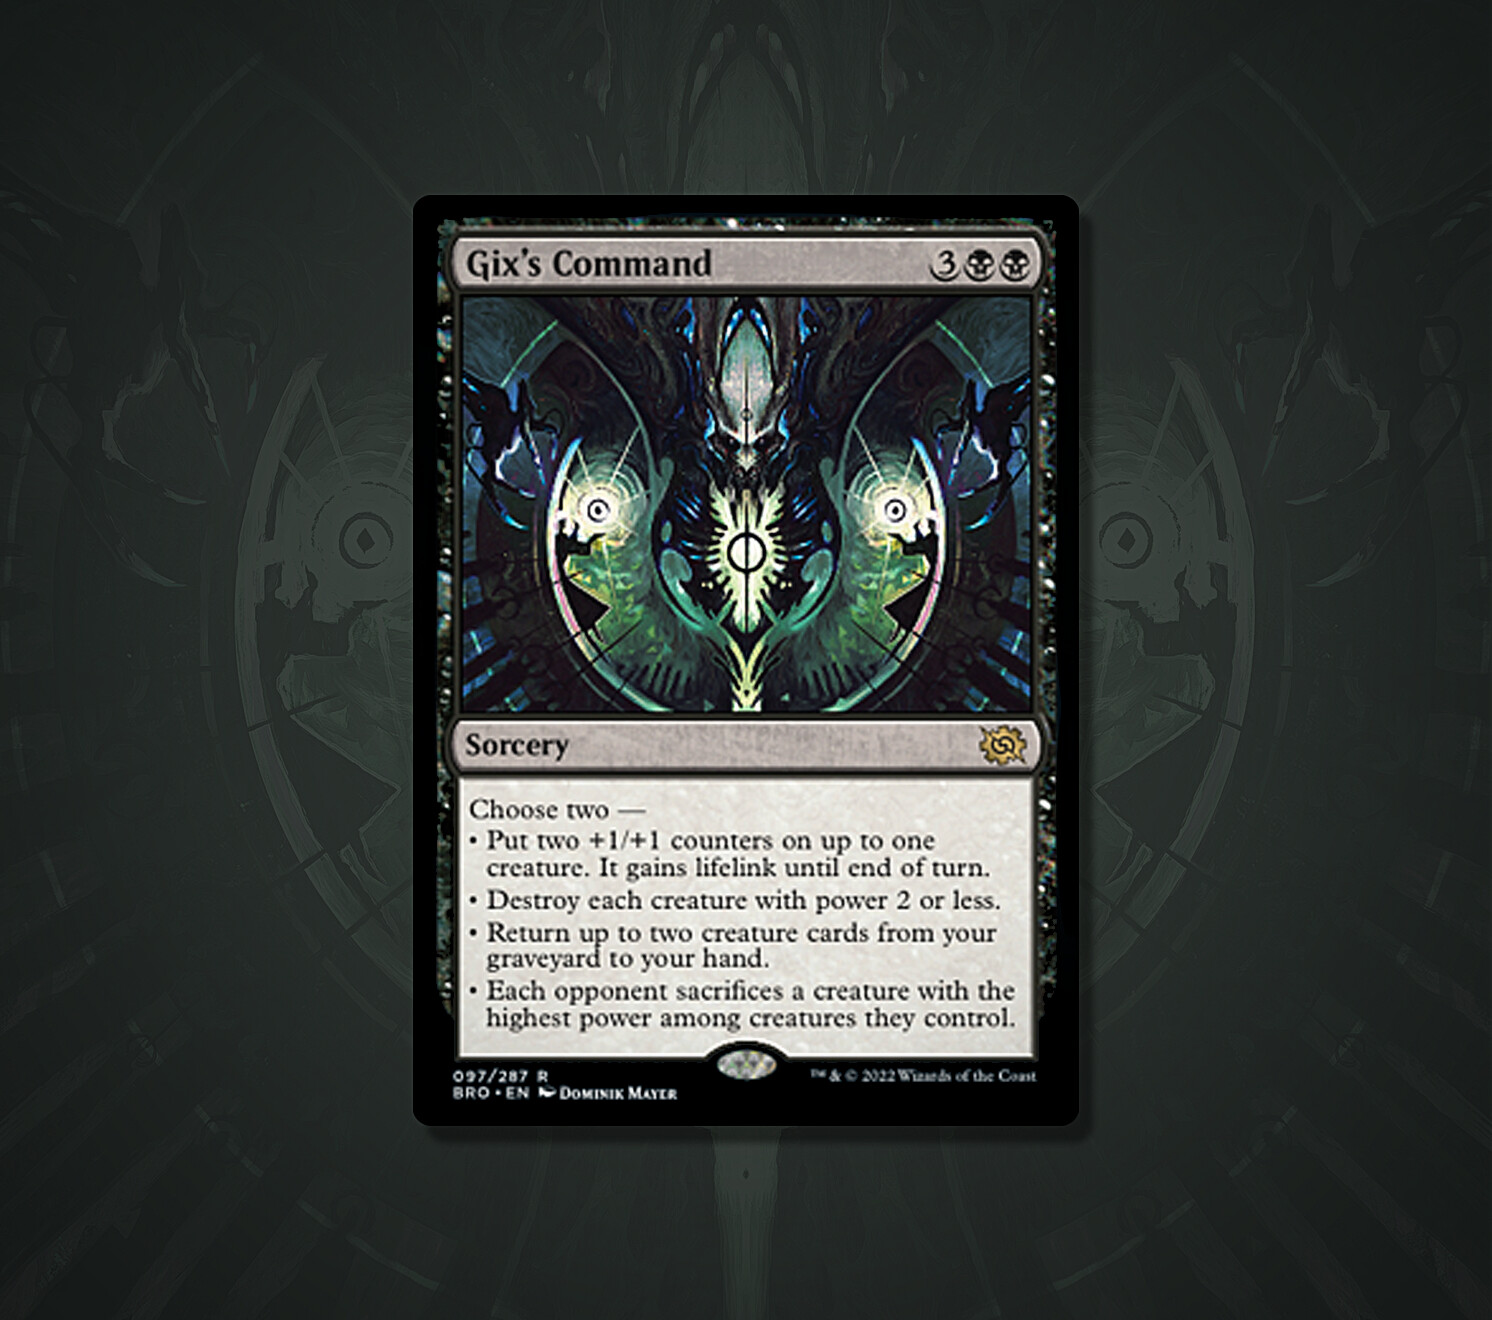 Card image for Gix's Command.